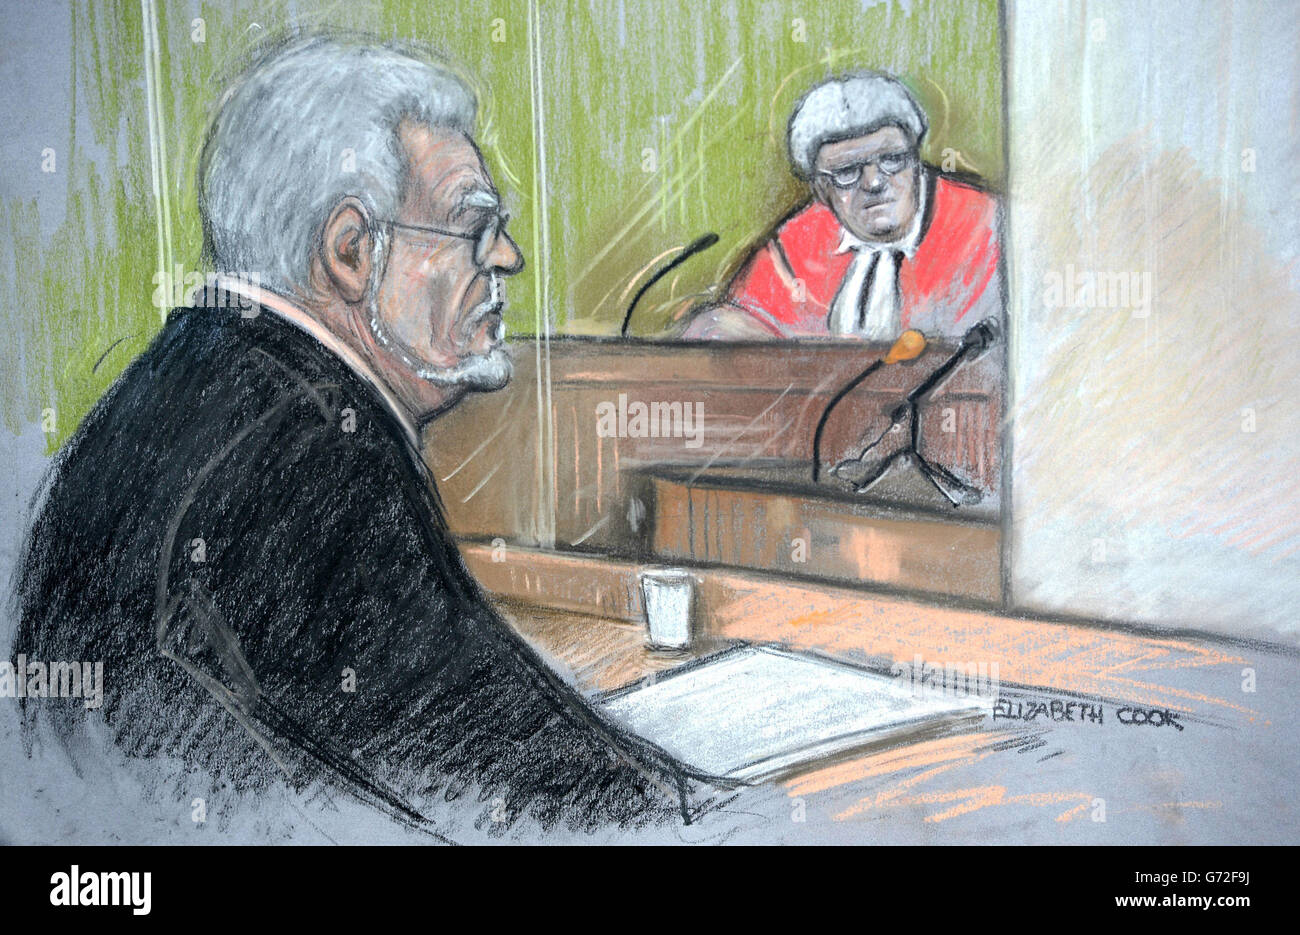 Court artist sketch by Elizabeth Cook of Rolf Harris in the dock at Southwark Crown Court, London as a witness gives evidence behind a curtain watched by the judge, Mr Justice Sweeney. Stock Photo